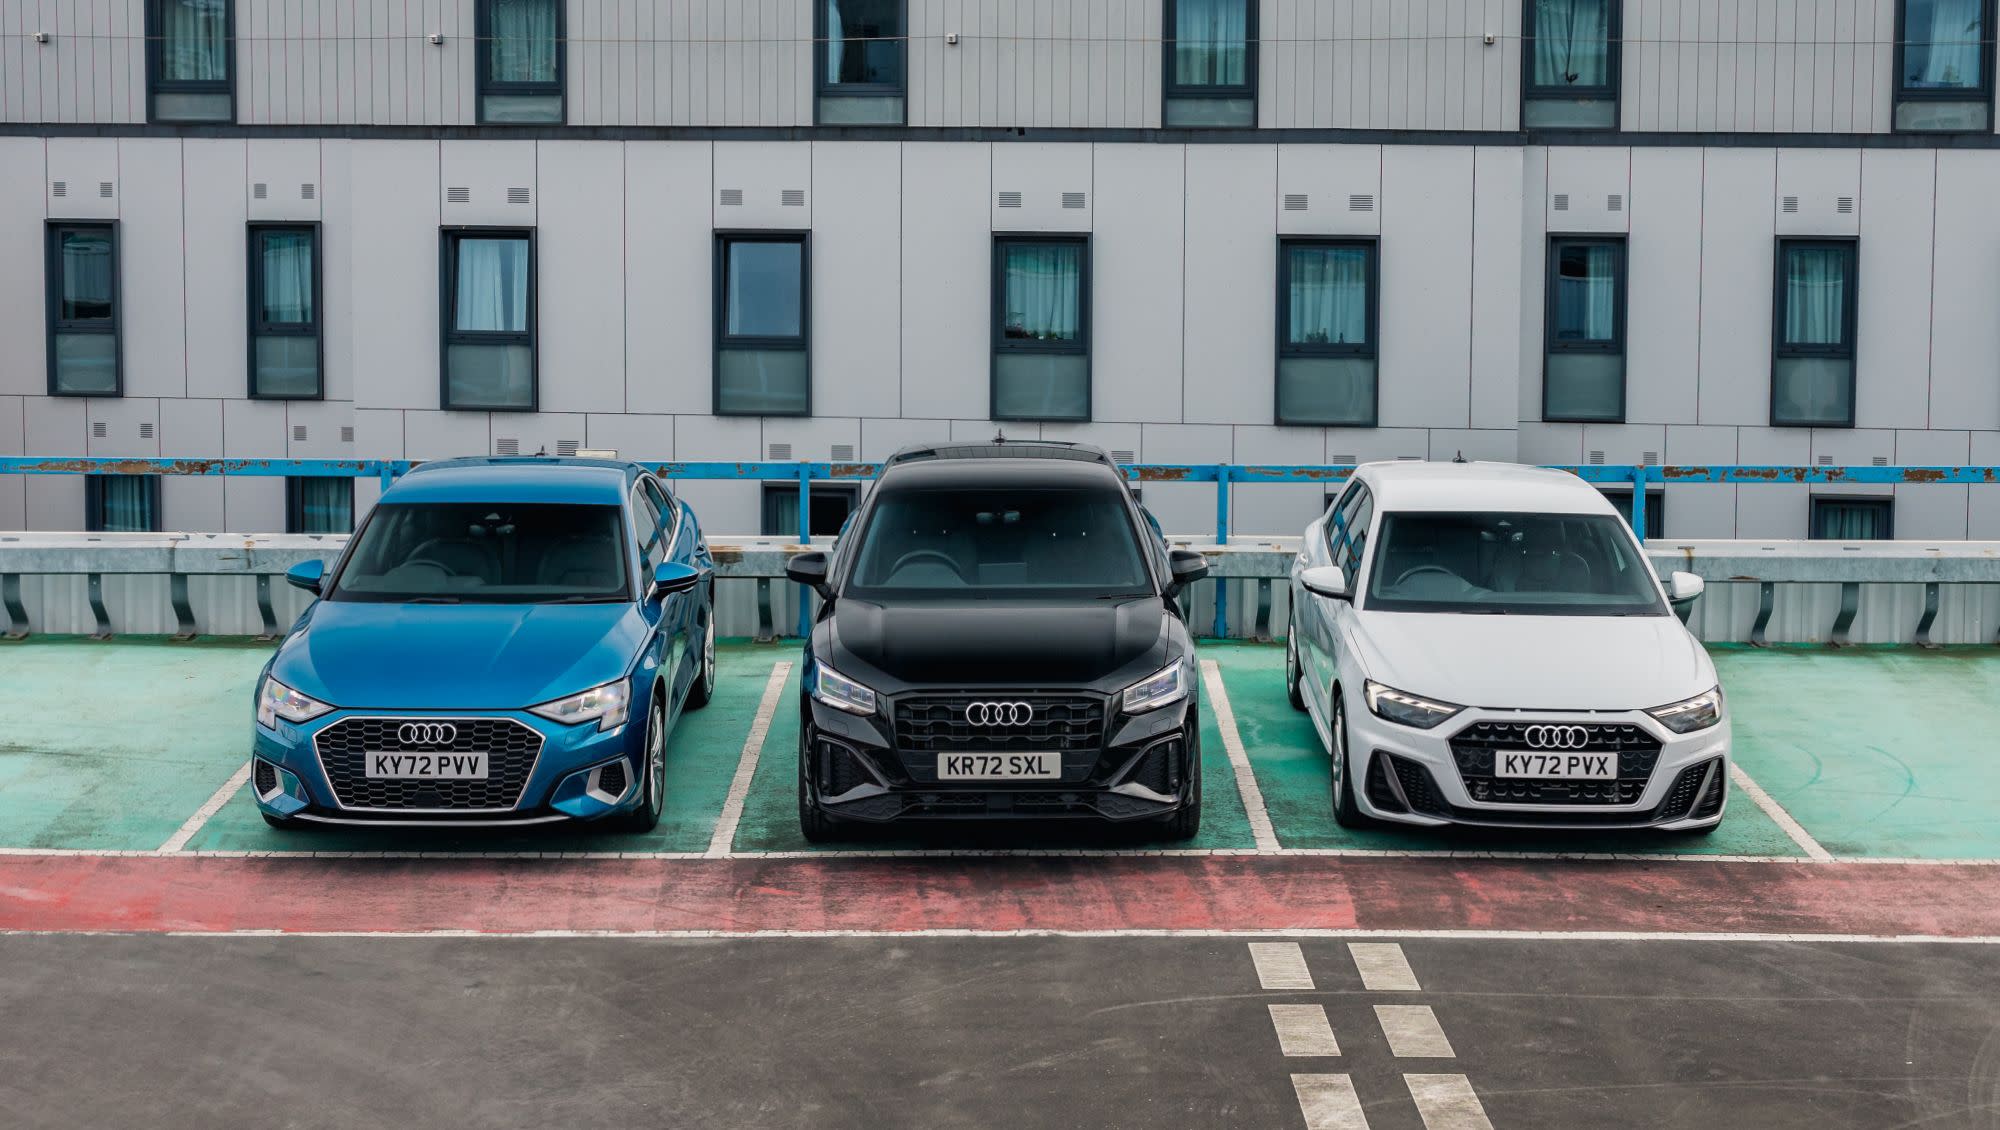 Latest Updates > Discover > Audi UK - The best compact car for you